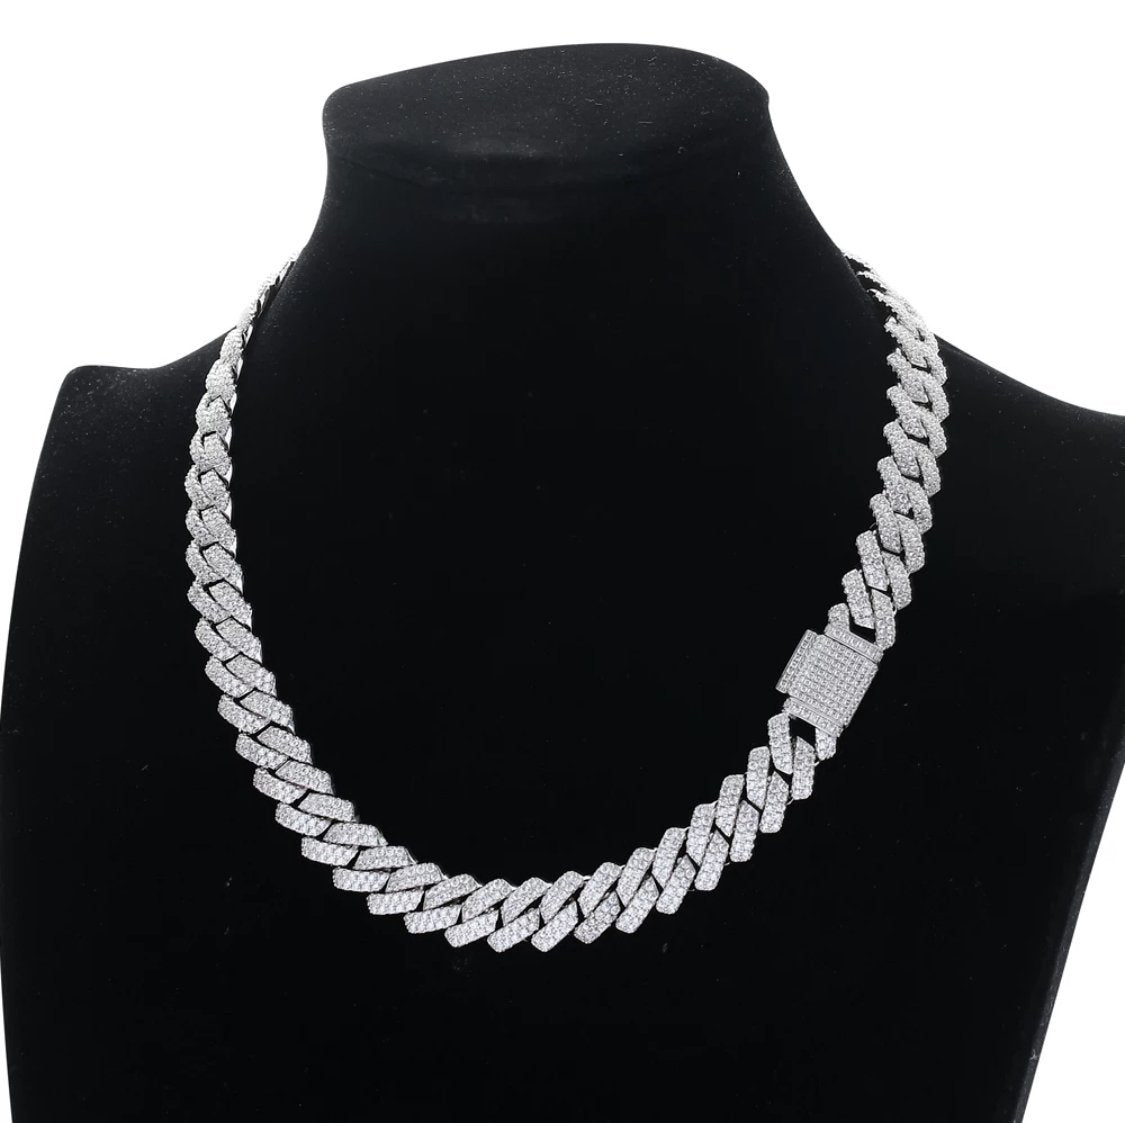 13mm Prong White Gold Plated Cuban Link Necklace - Bedazzle Baddie